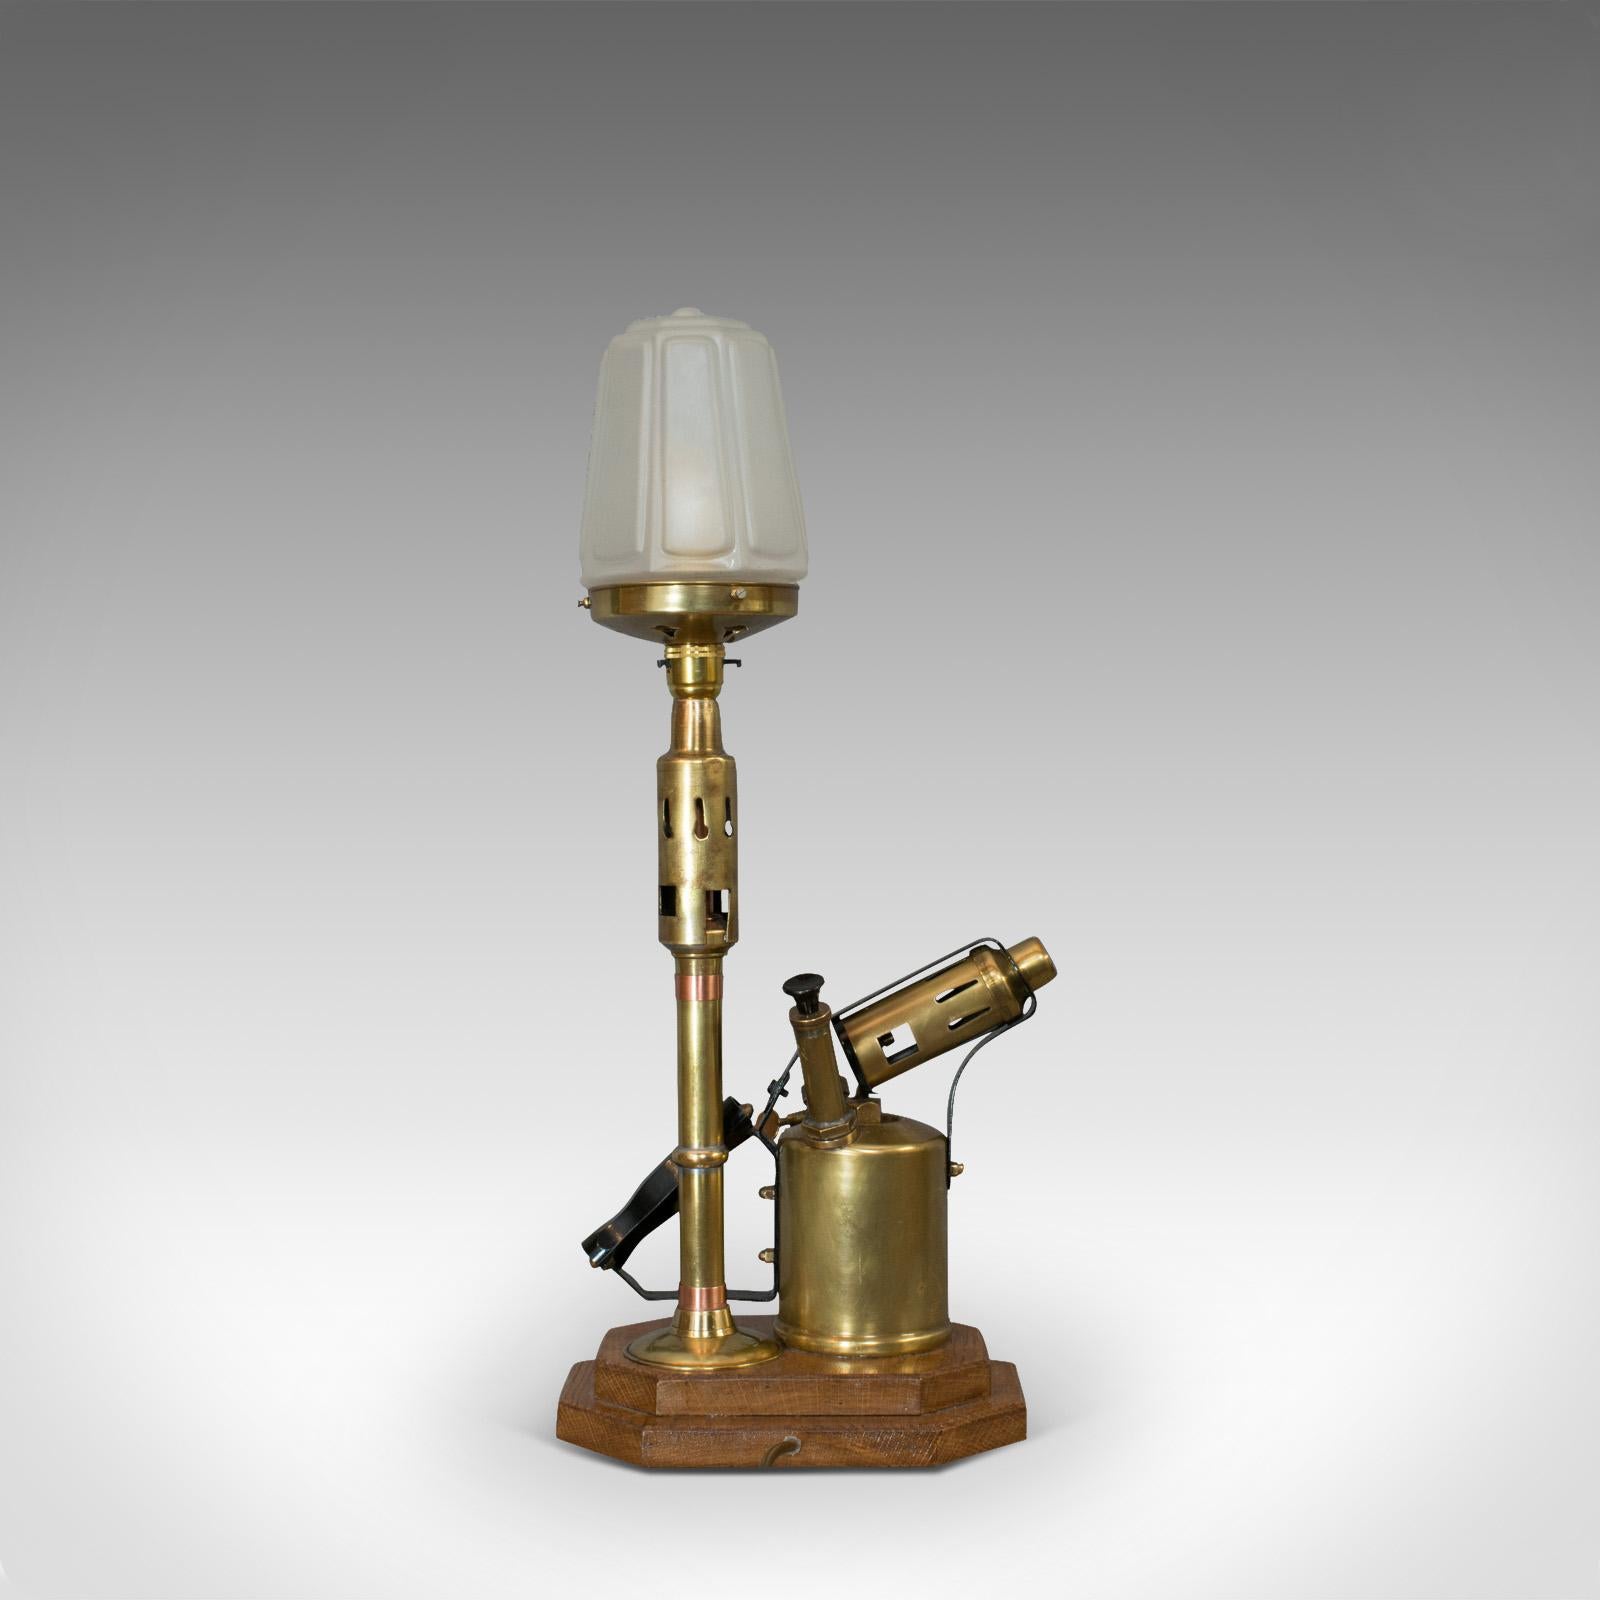 Industrial Vintage Decorative Lamp, English, Brass, Blow Torch, Light, Shade, Oak Base For Sale